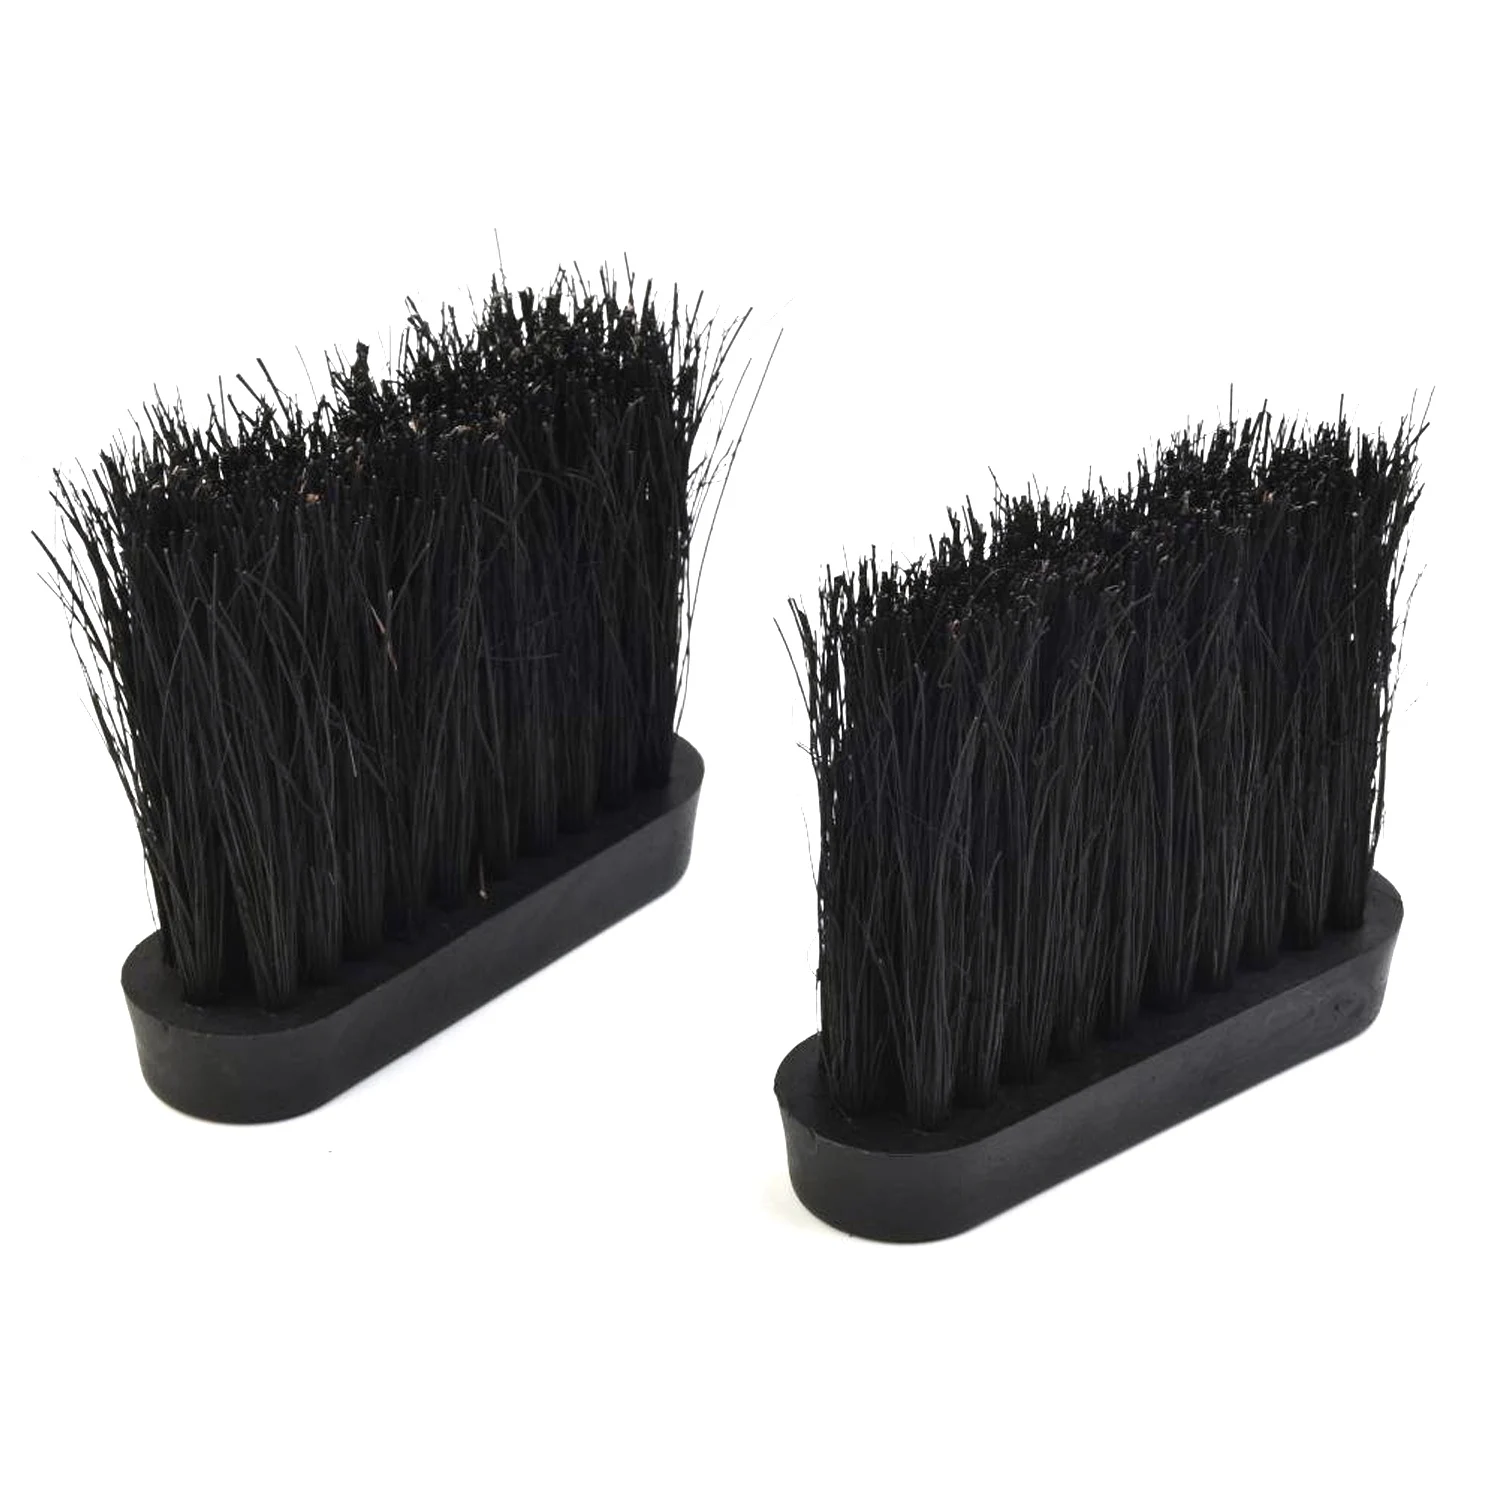 2Pcs Fireplace Brush Black Oblong Replacement Spare Hearth Head Refill For Companion Sets For Doing Thorough Cleaning 2023 NEW 2pcs oblong hearth brush head chimney fireplaces cleaning tool household brush stove rotary sweep home supplies winter new year